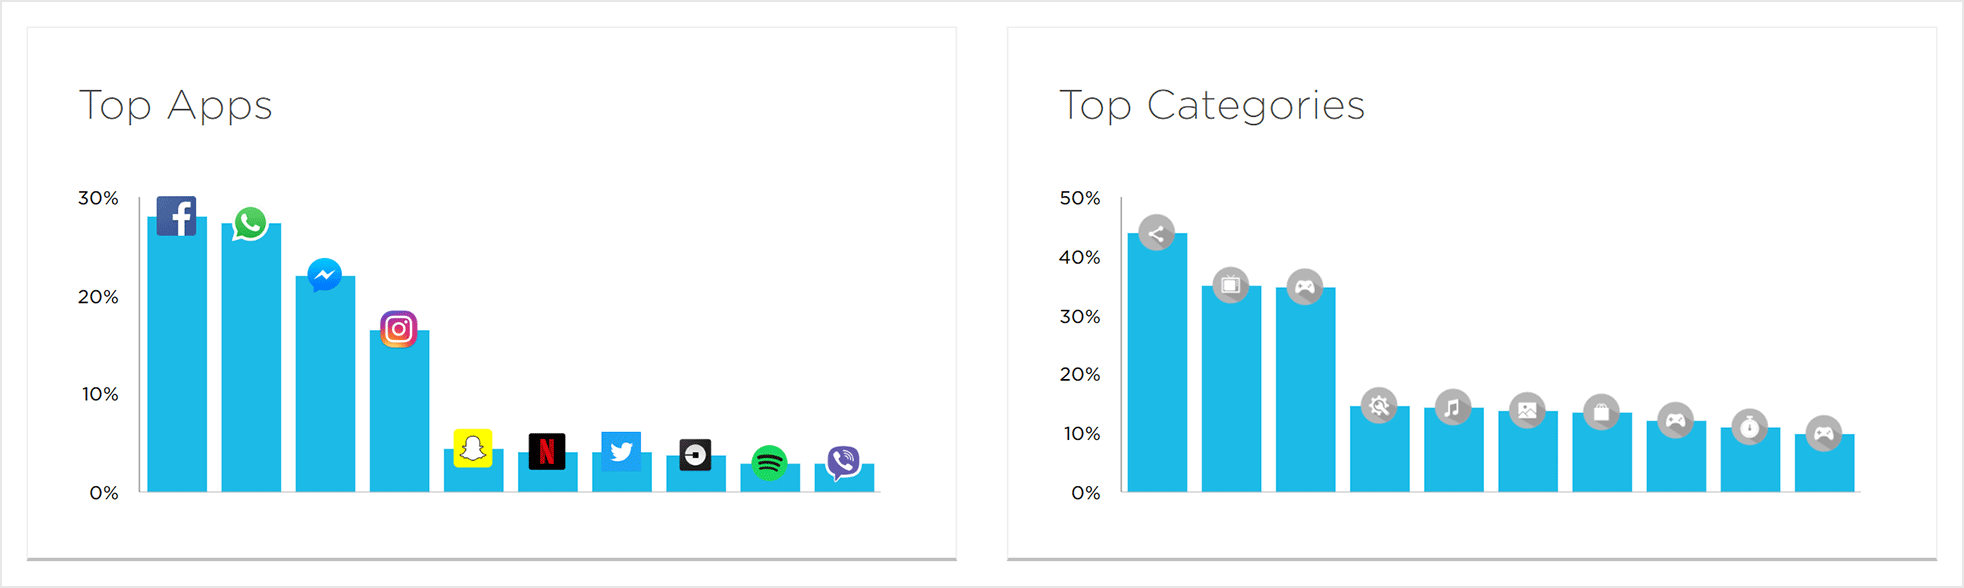 Top Apps and Categories Overview